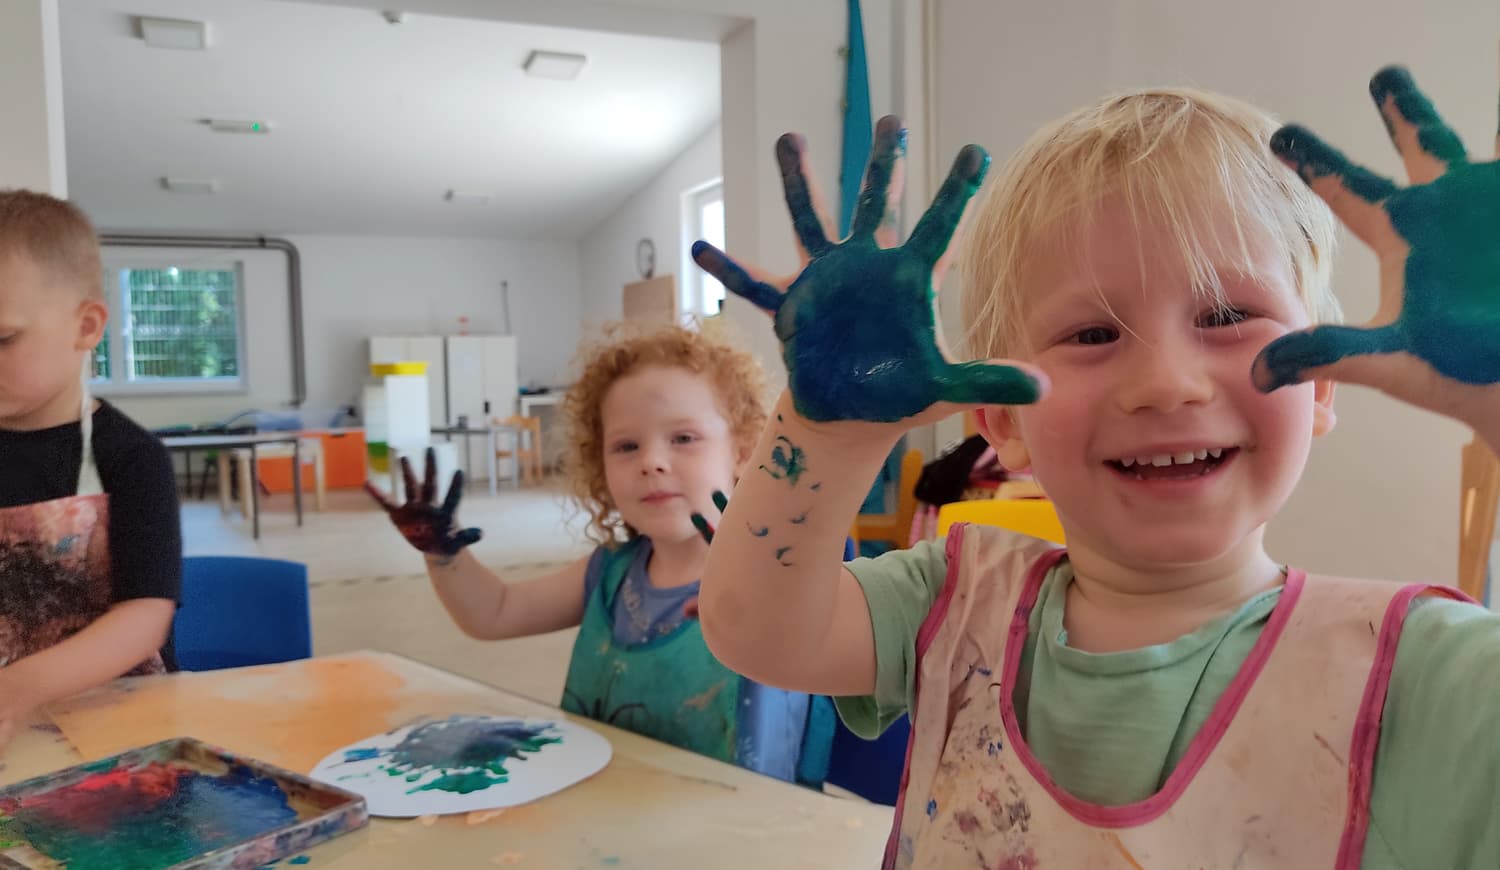 Children playing with hand painting